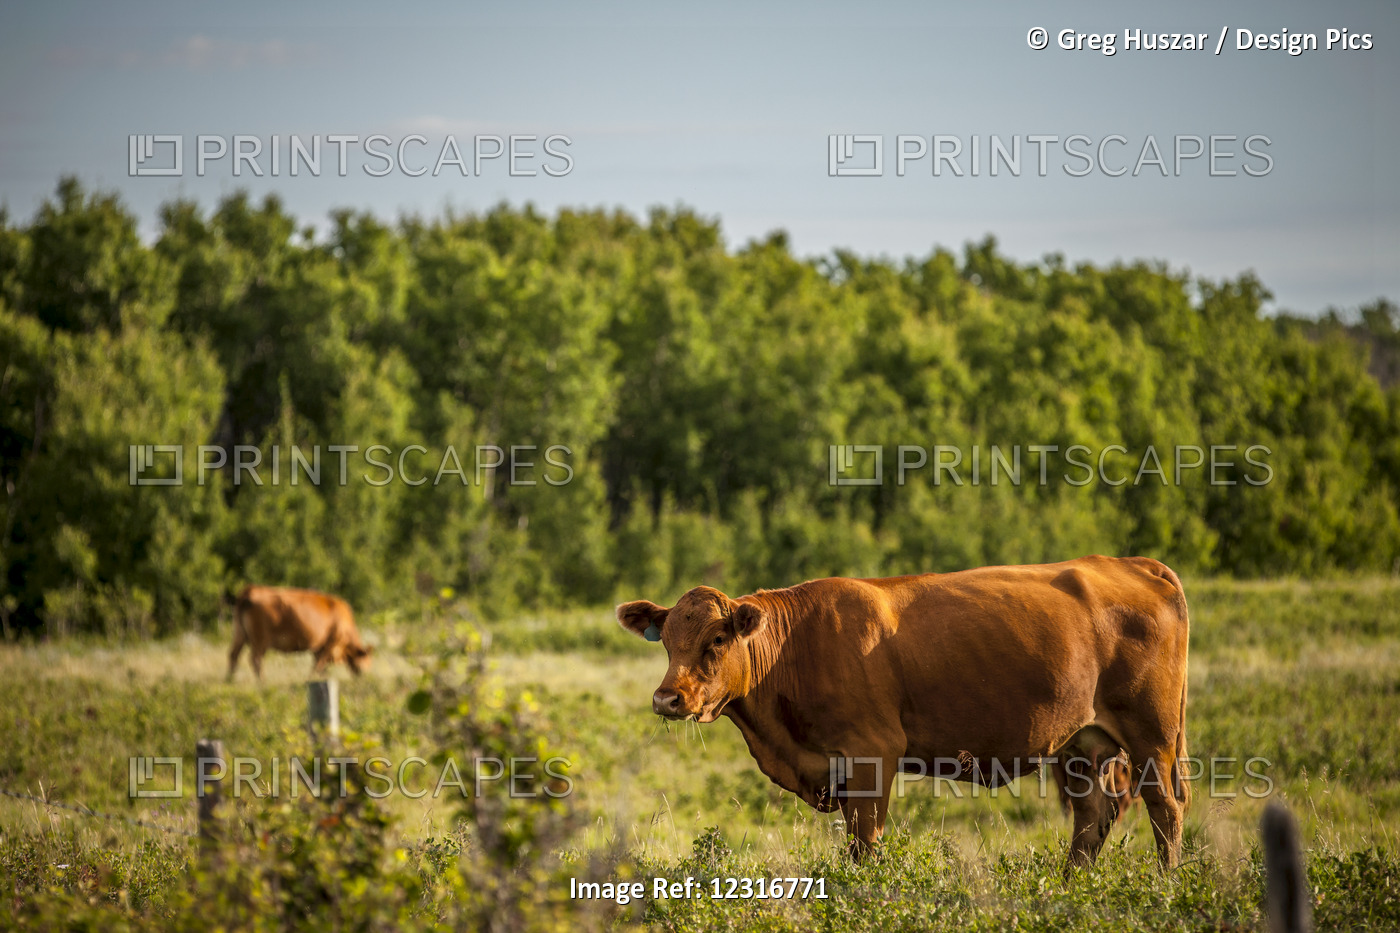 Brown Cows In A Pasture With A Forest On The Edge; Saskatchewan, Canada